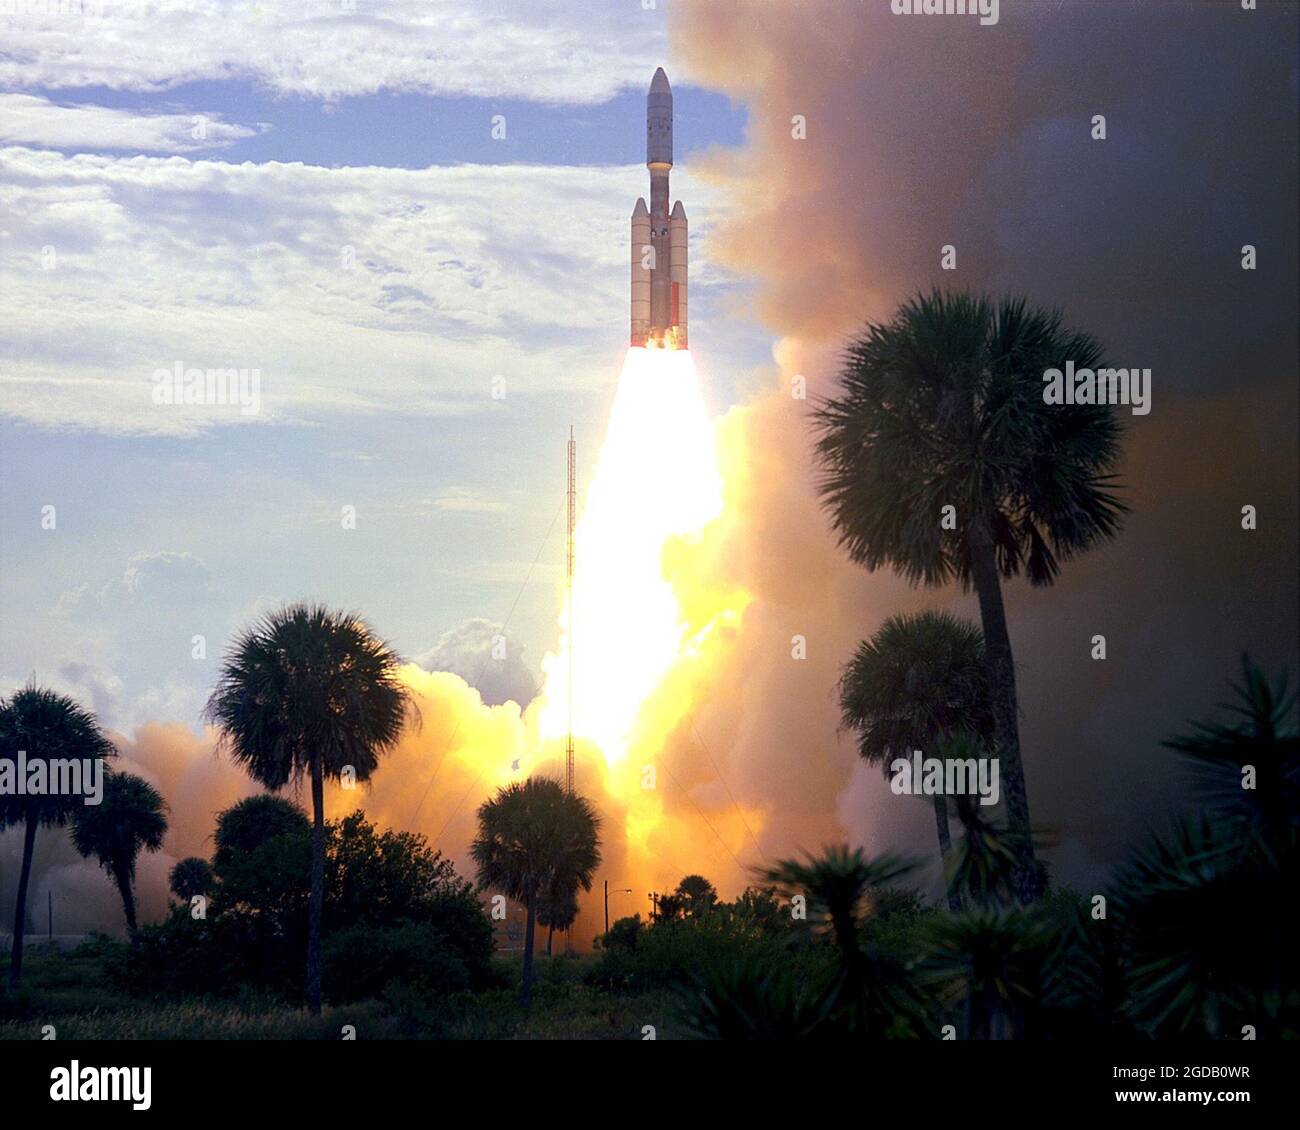 The Viking 1 mission on a Titan III rocket takes off from Cape Canaveral in Florida on the 20August 1975. The Viking probe was the first spacecraft to land on Mars. Stock Photo